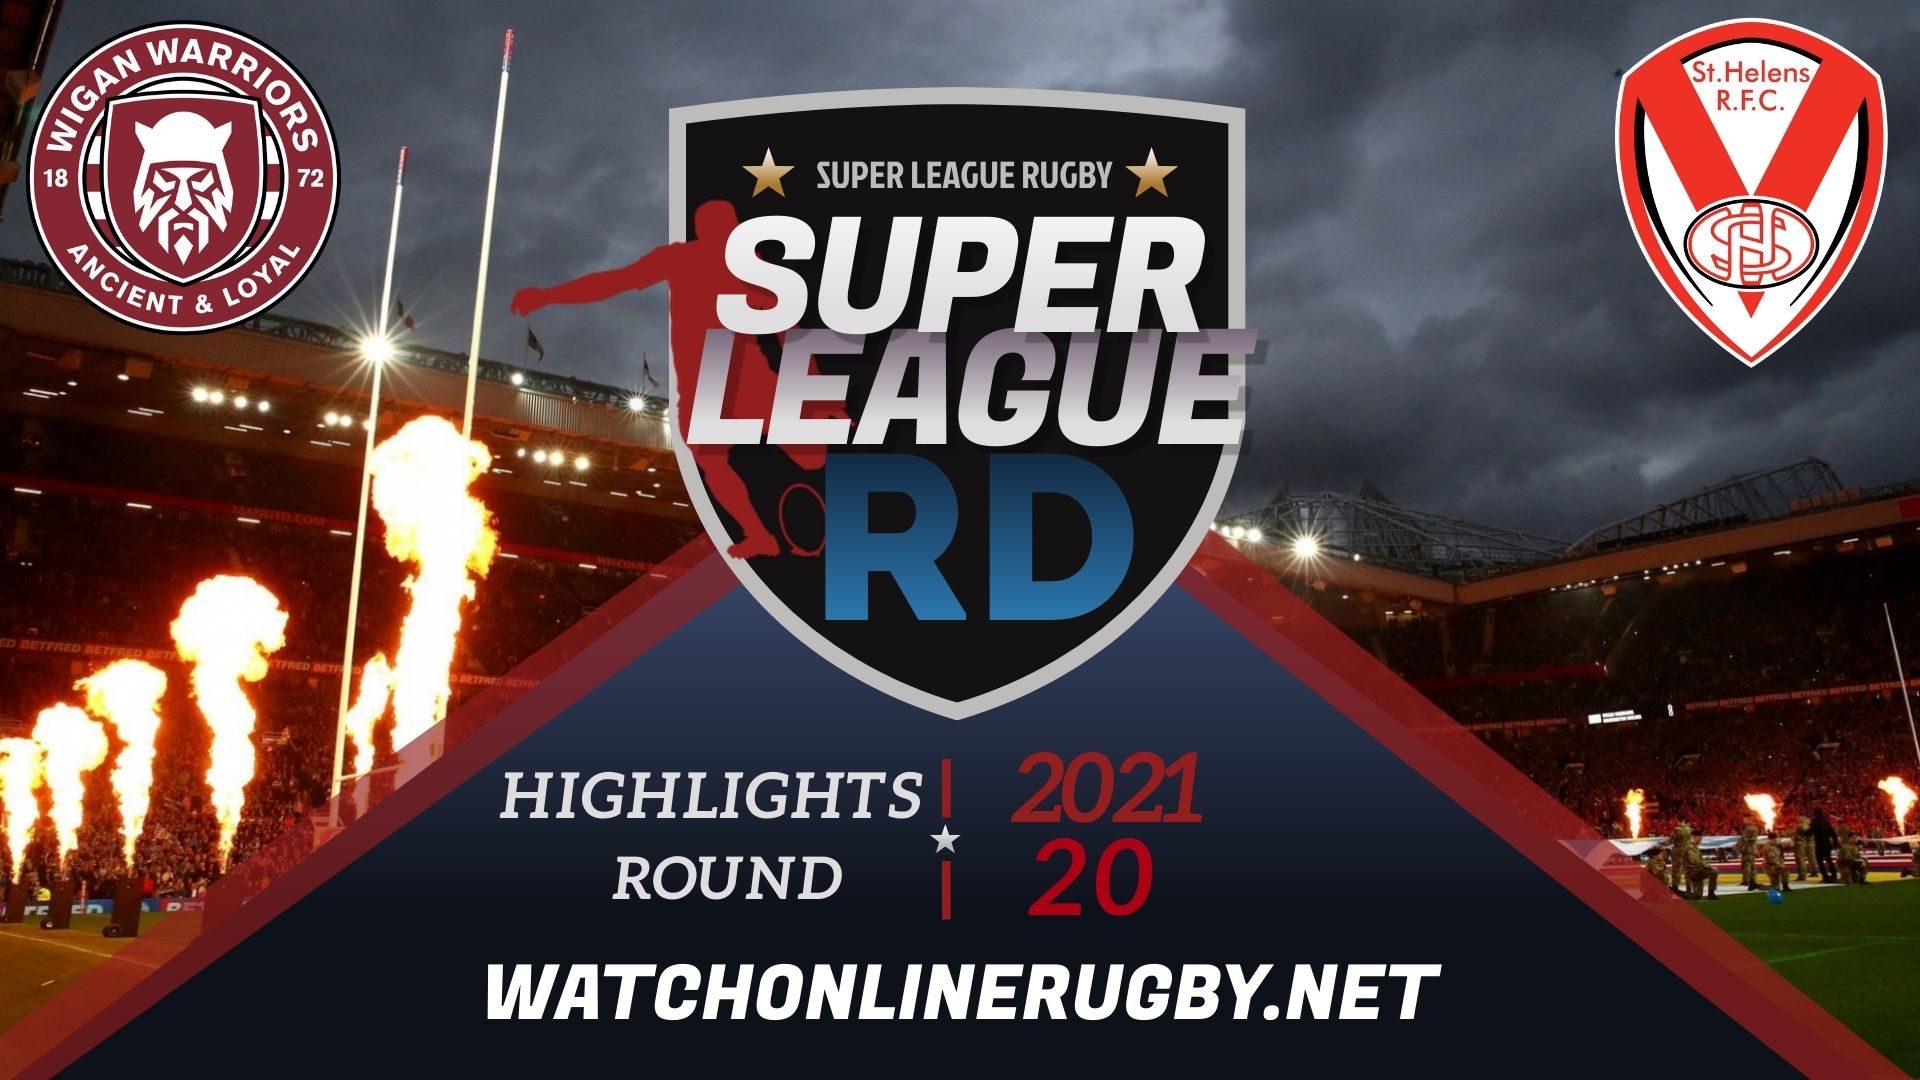 Wigan Warriors Vs St Helens Super League Rugby 2021 RD 20